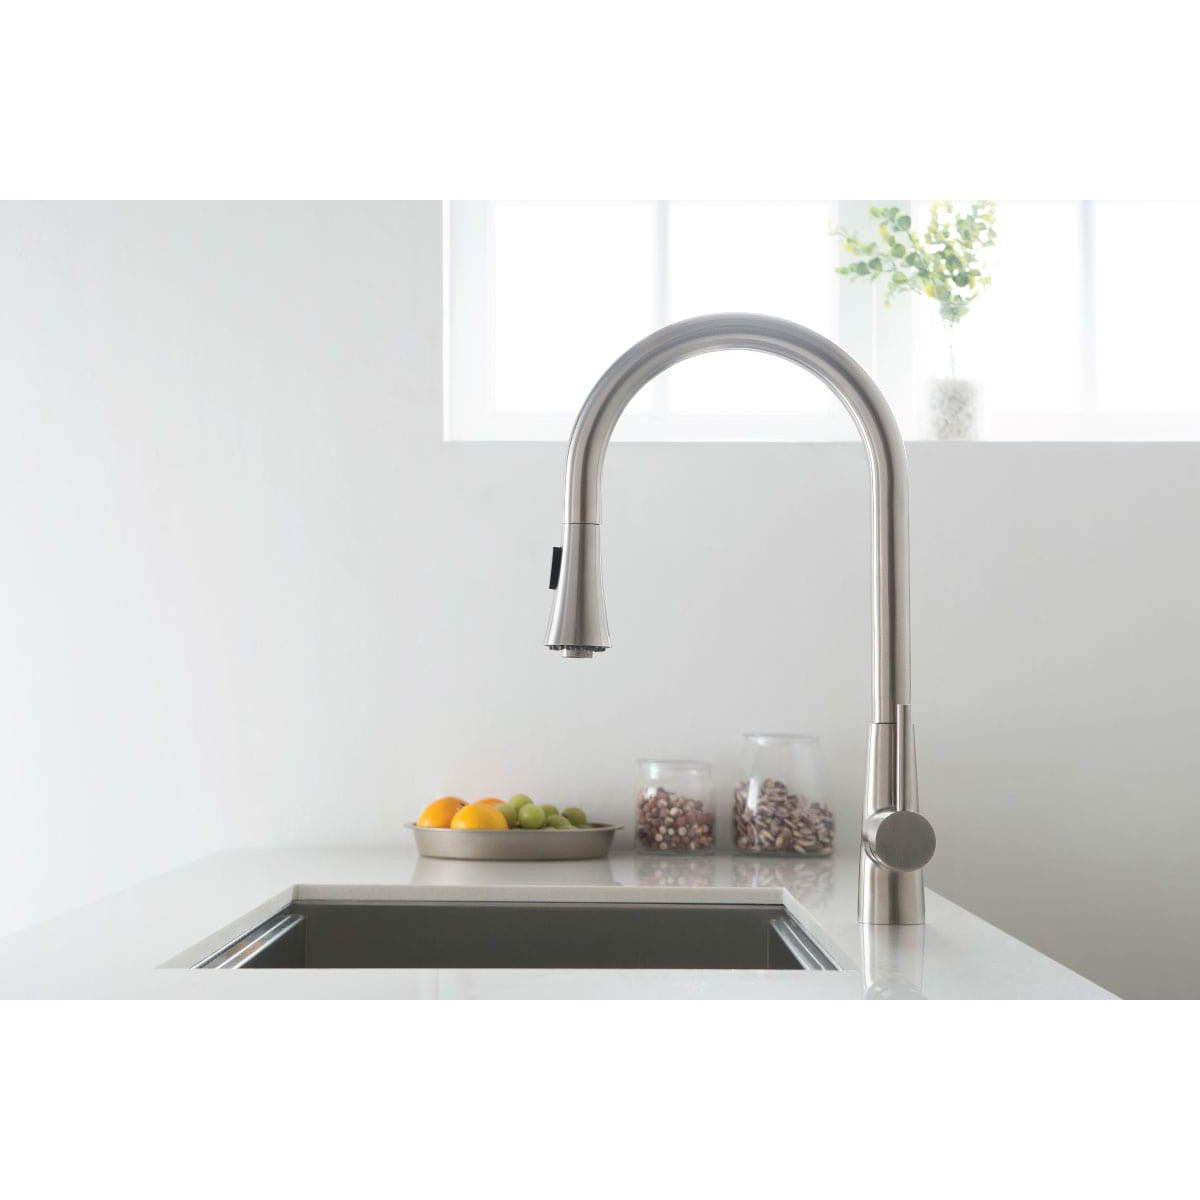 Isenberg Klassiker Zest 18" Single Hole Stainless Steel Pull-Down Kitchen Faucet With Dual Function Sprayer